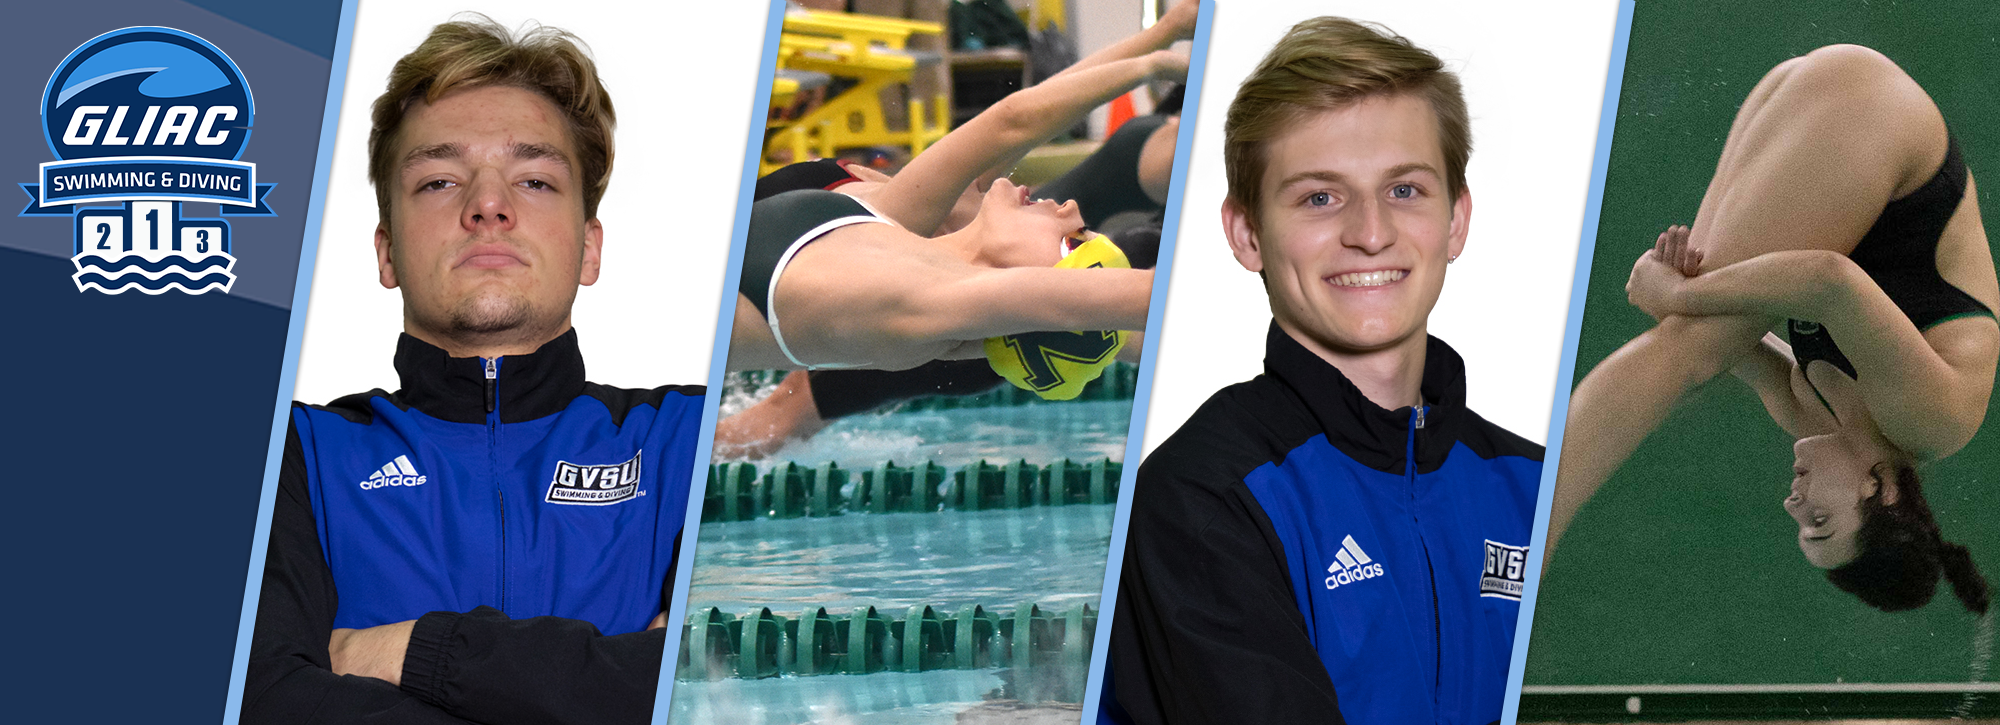 GLIAC Recognizes Men's and Women's Swimmers and Divers of the Week